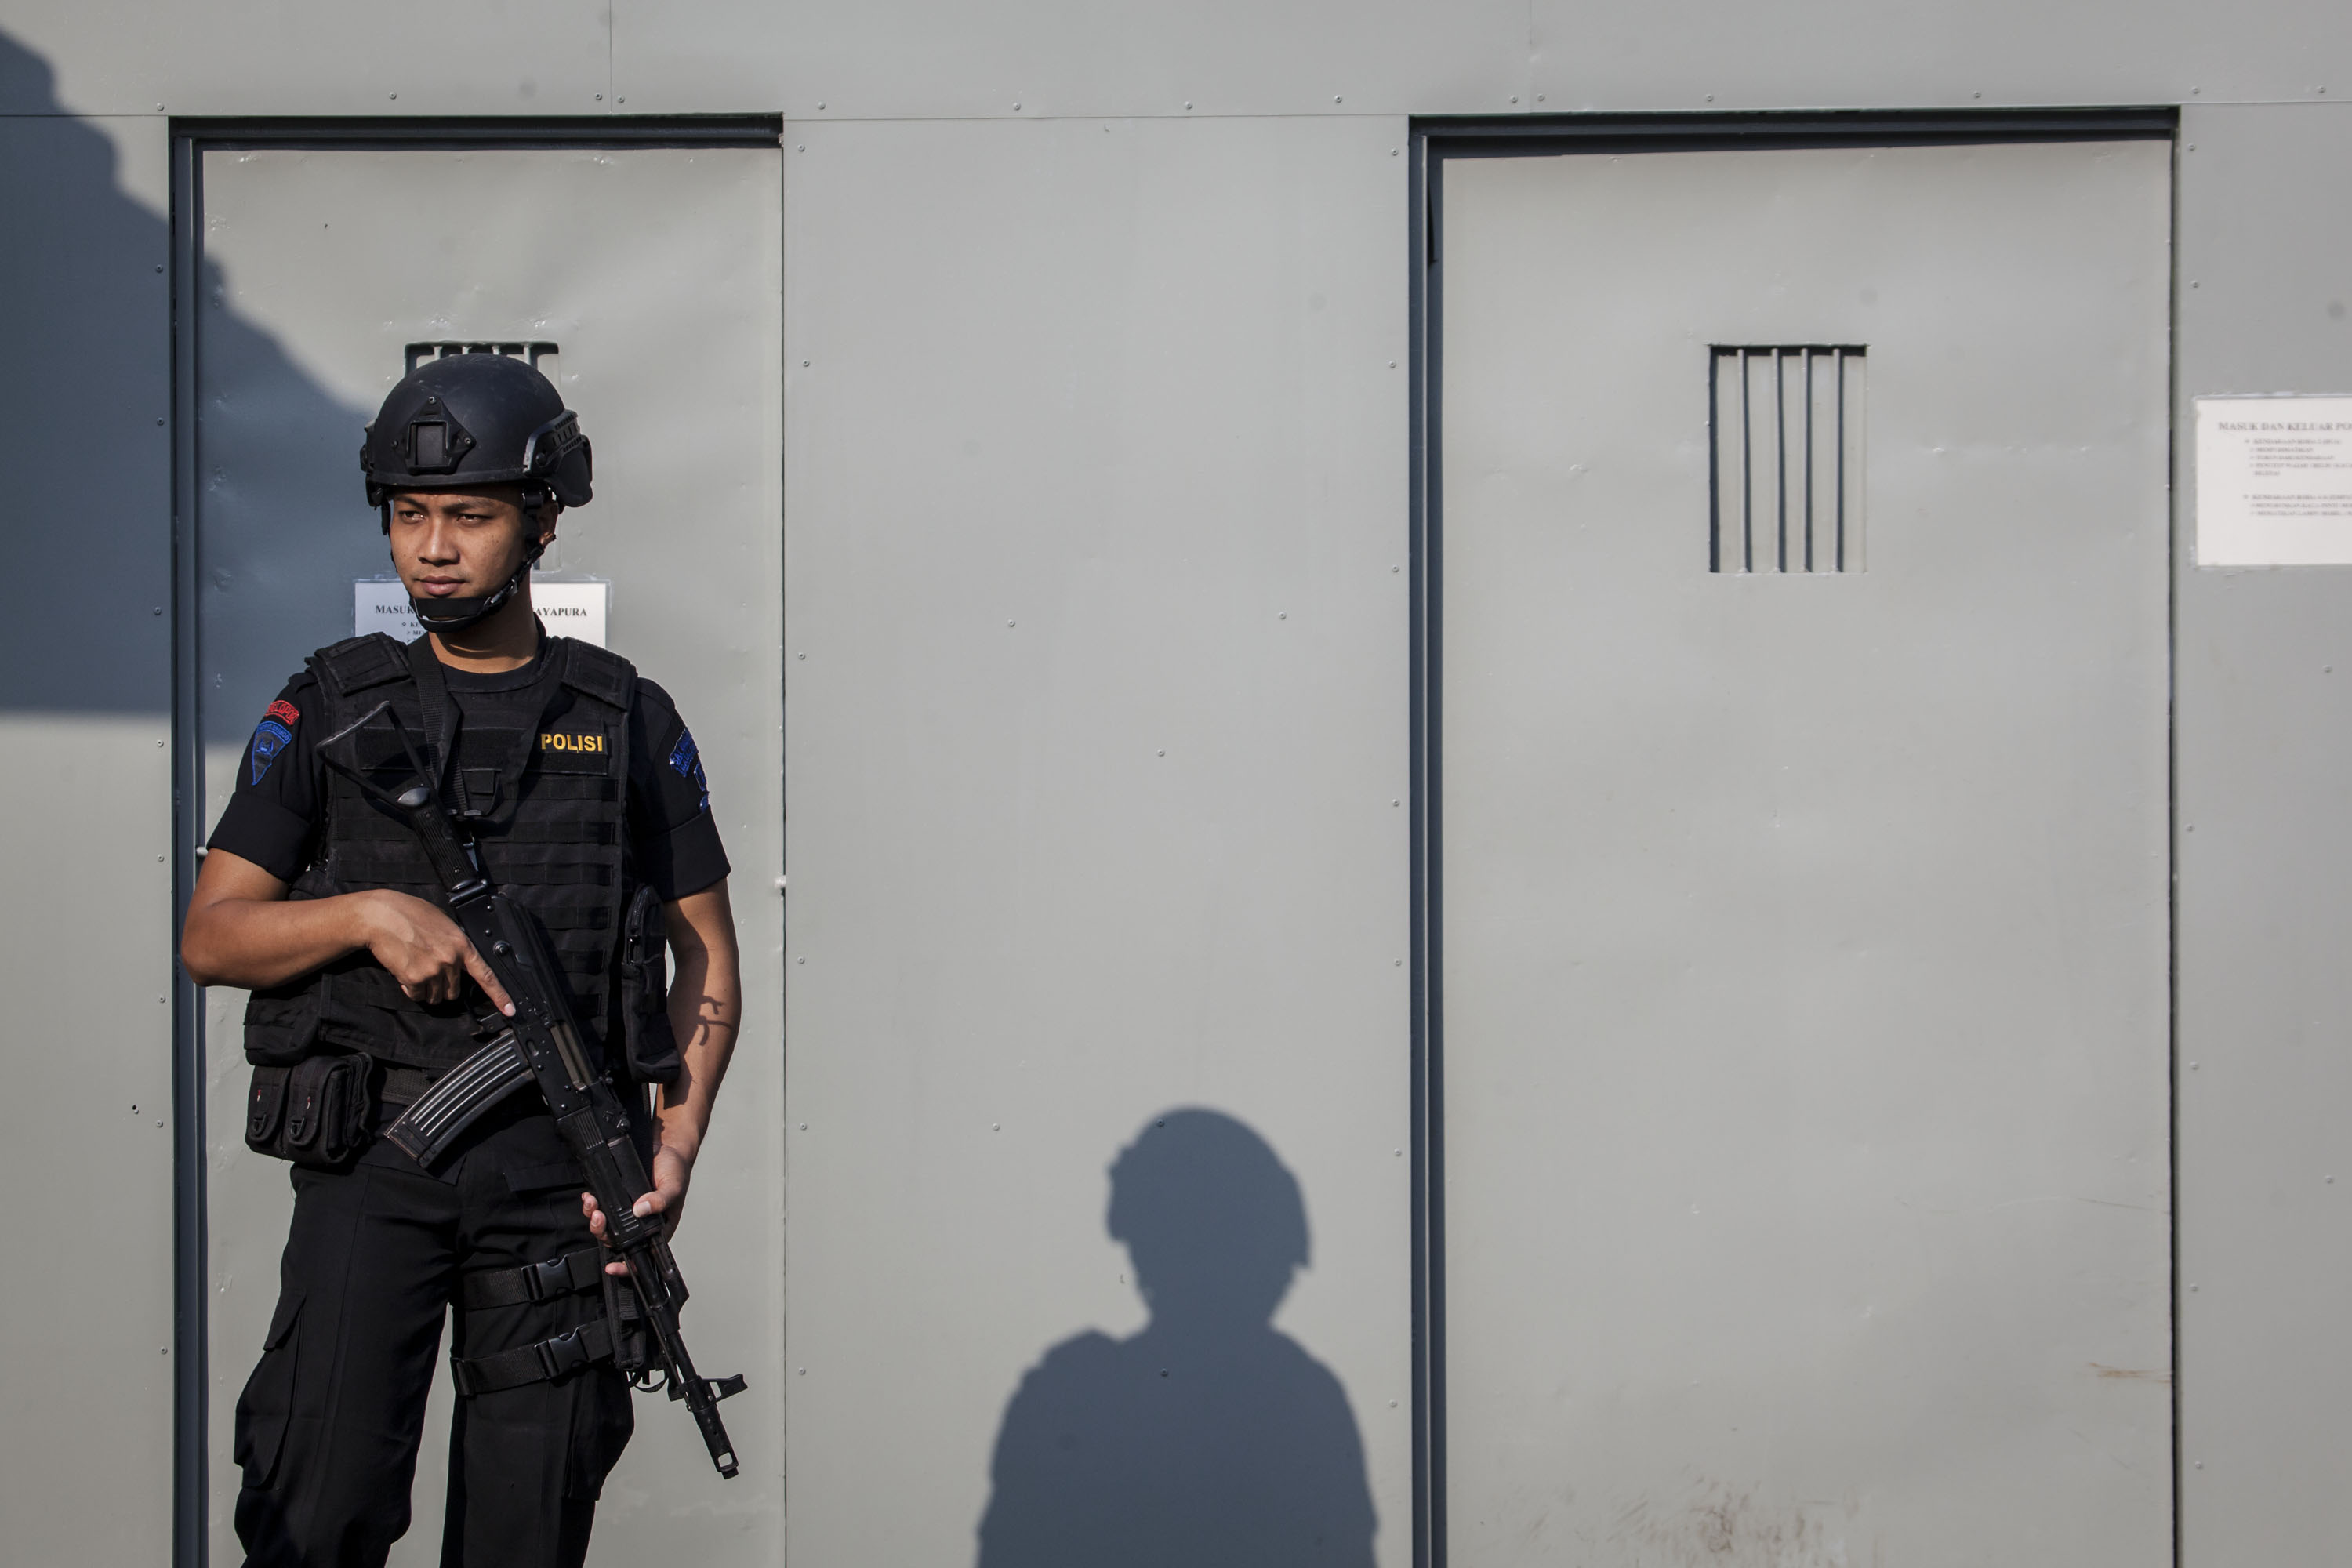 An Indonesian policeman stands guard at the entrance gate to Nusakambangan prison, ahead of a third round of drug executions on July 28, 2016 in Cilacap, Central Java, Indonesia. (Ulet Ifansasti—Getty Images)